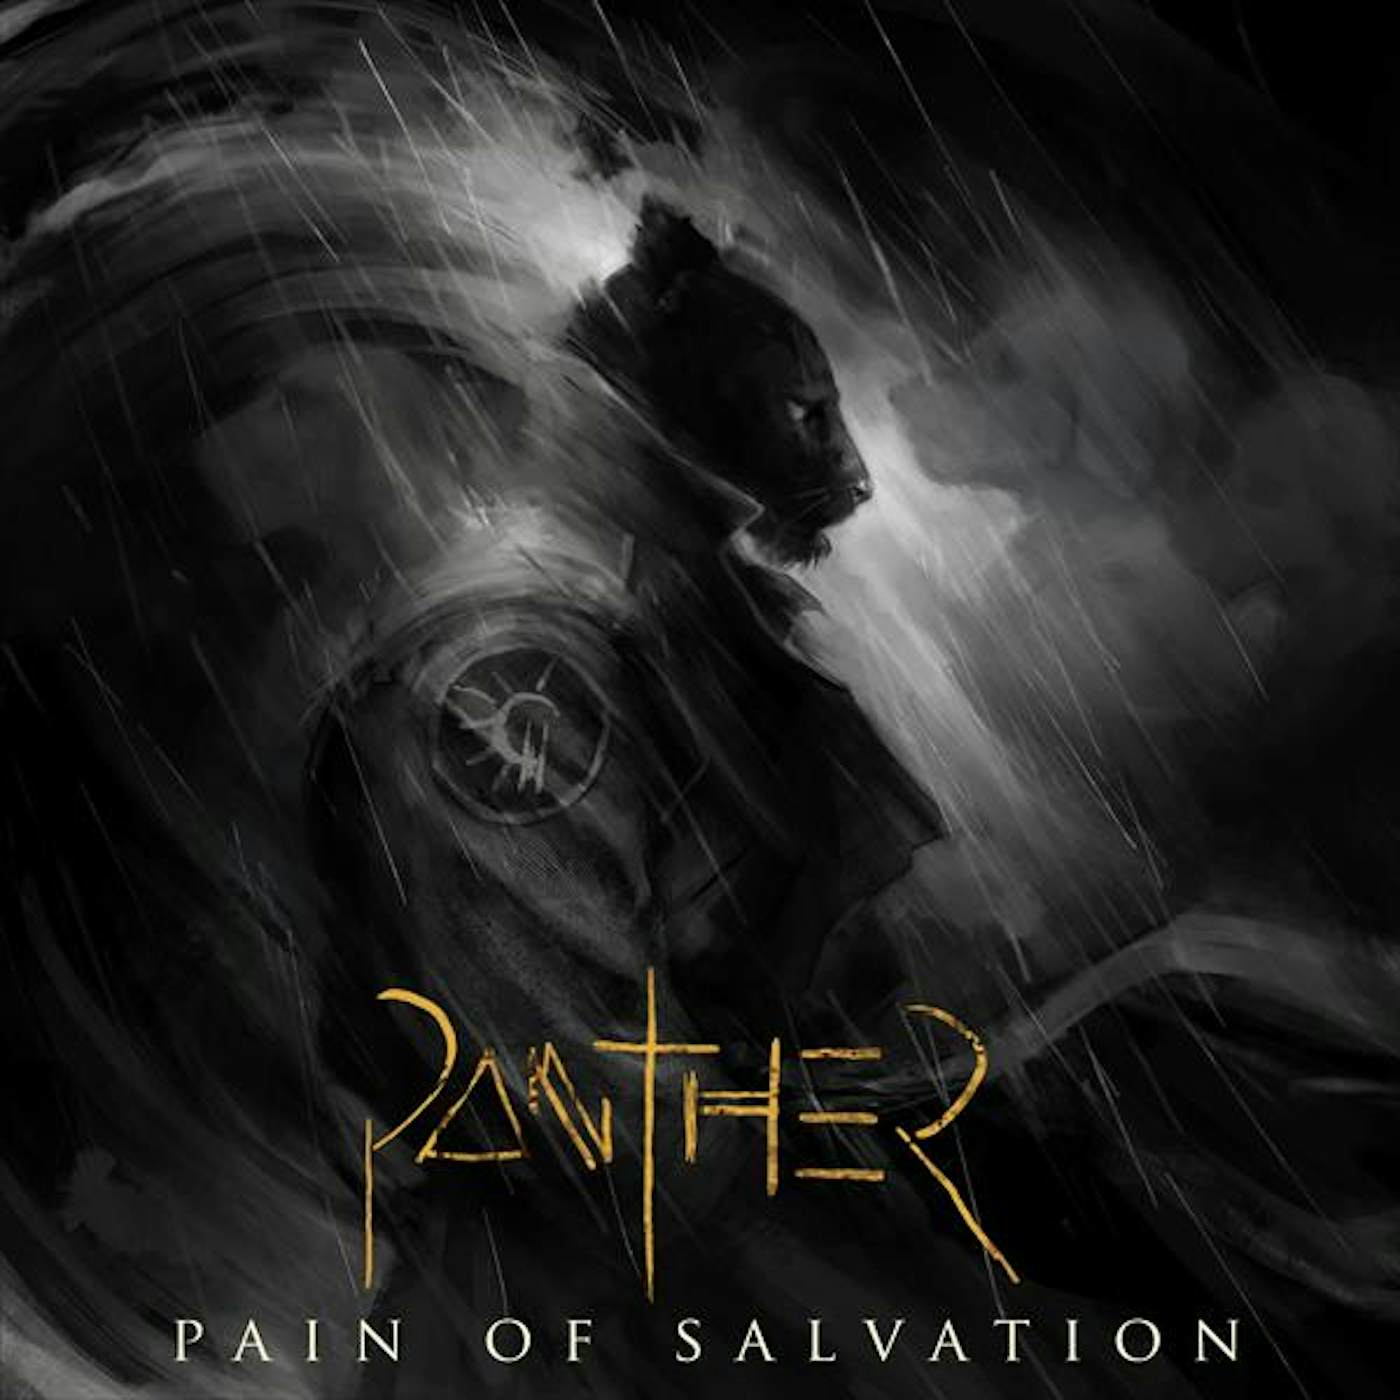 Pain of Salvation Panther Vinyl Record